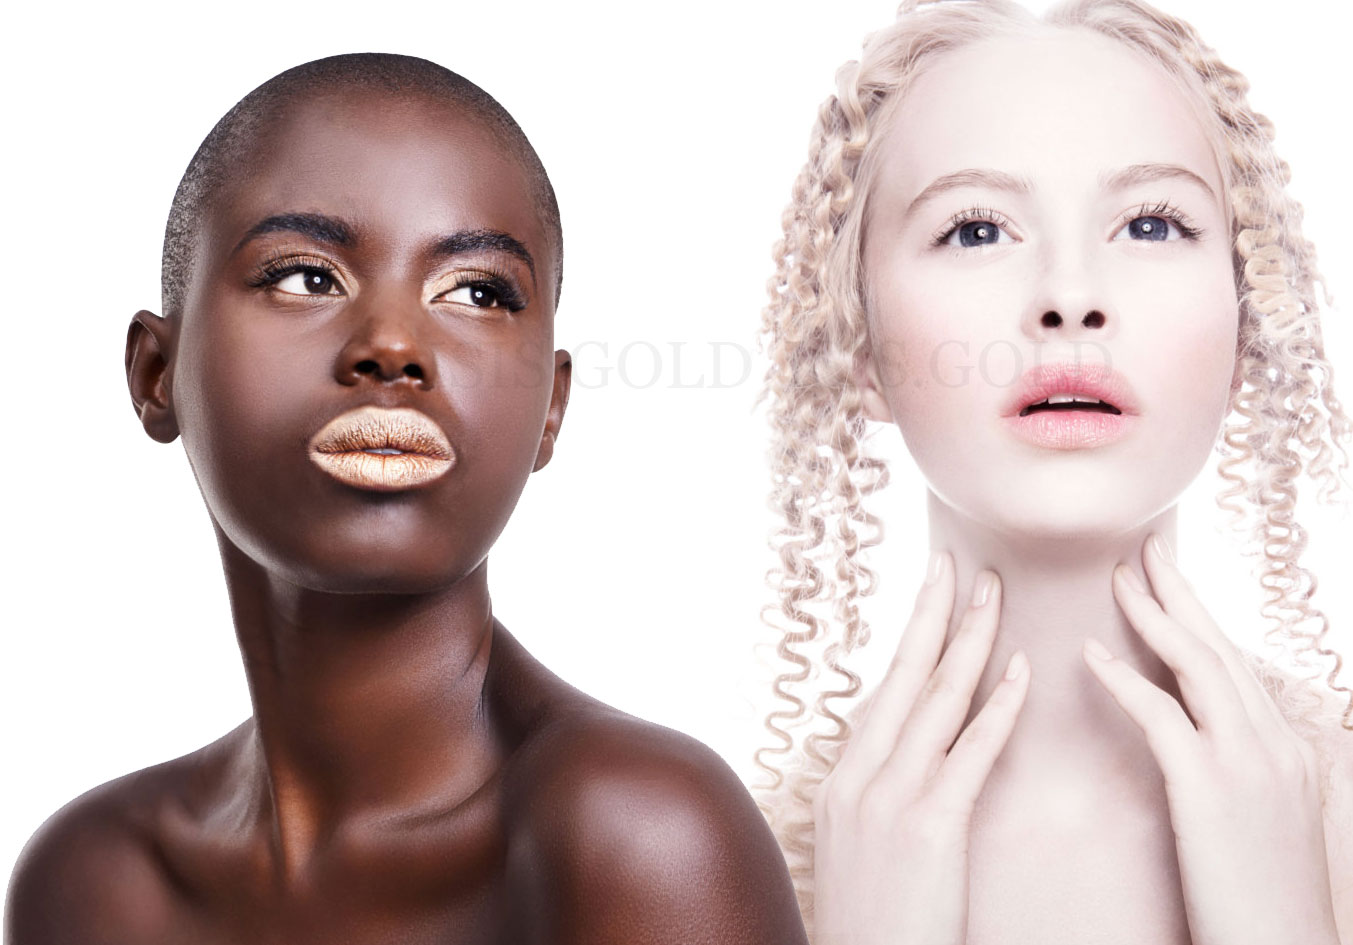  Skin bleaching  a growing canker among black population 